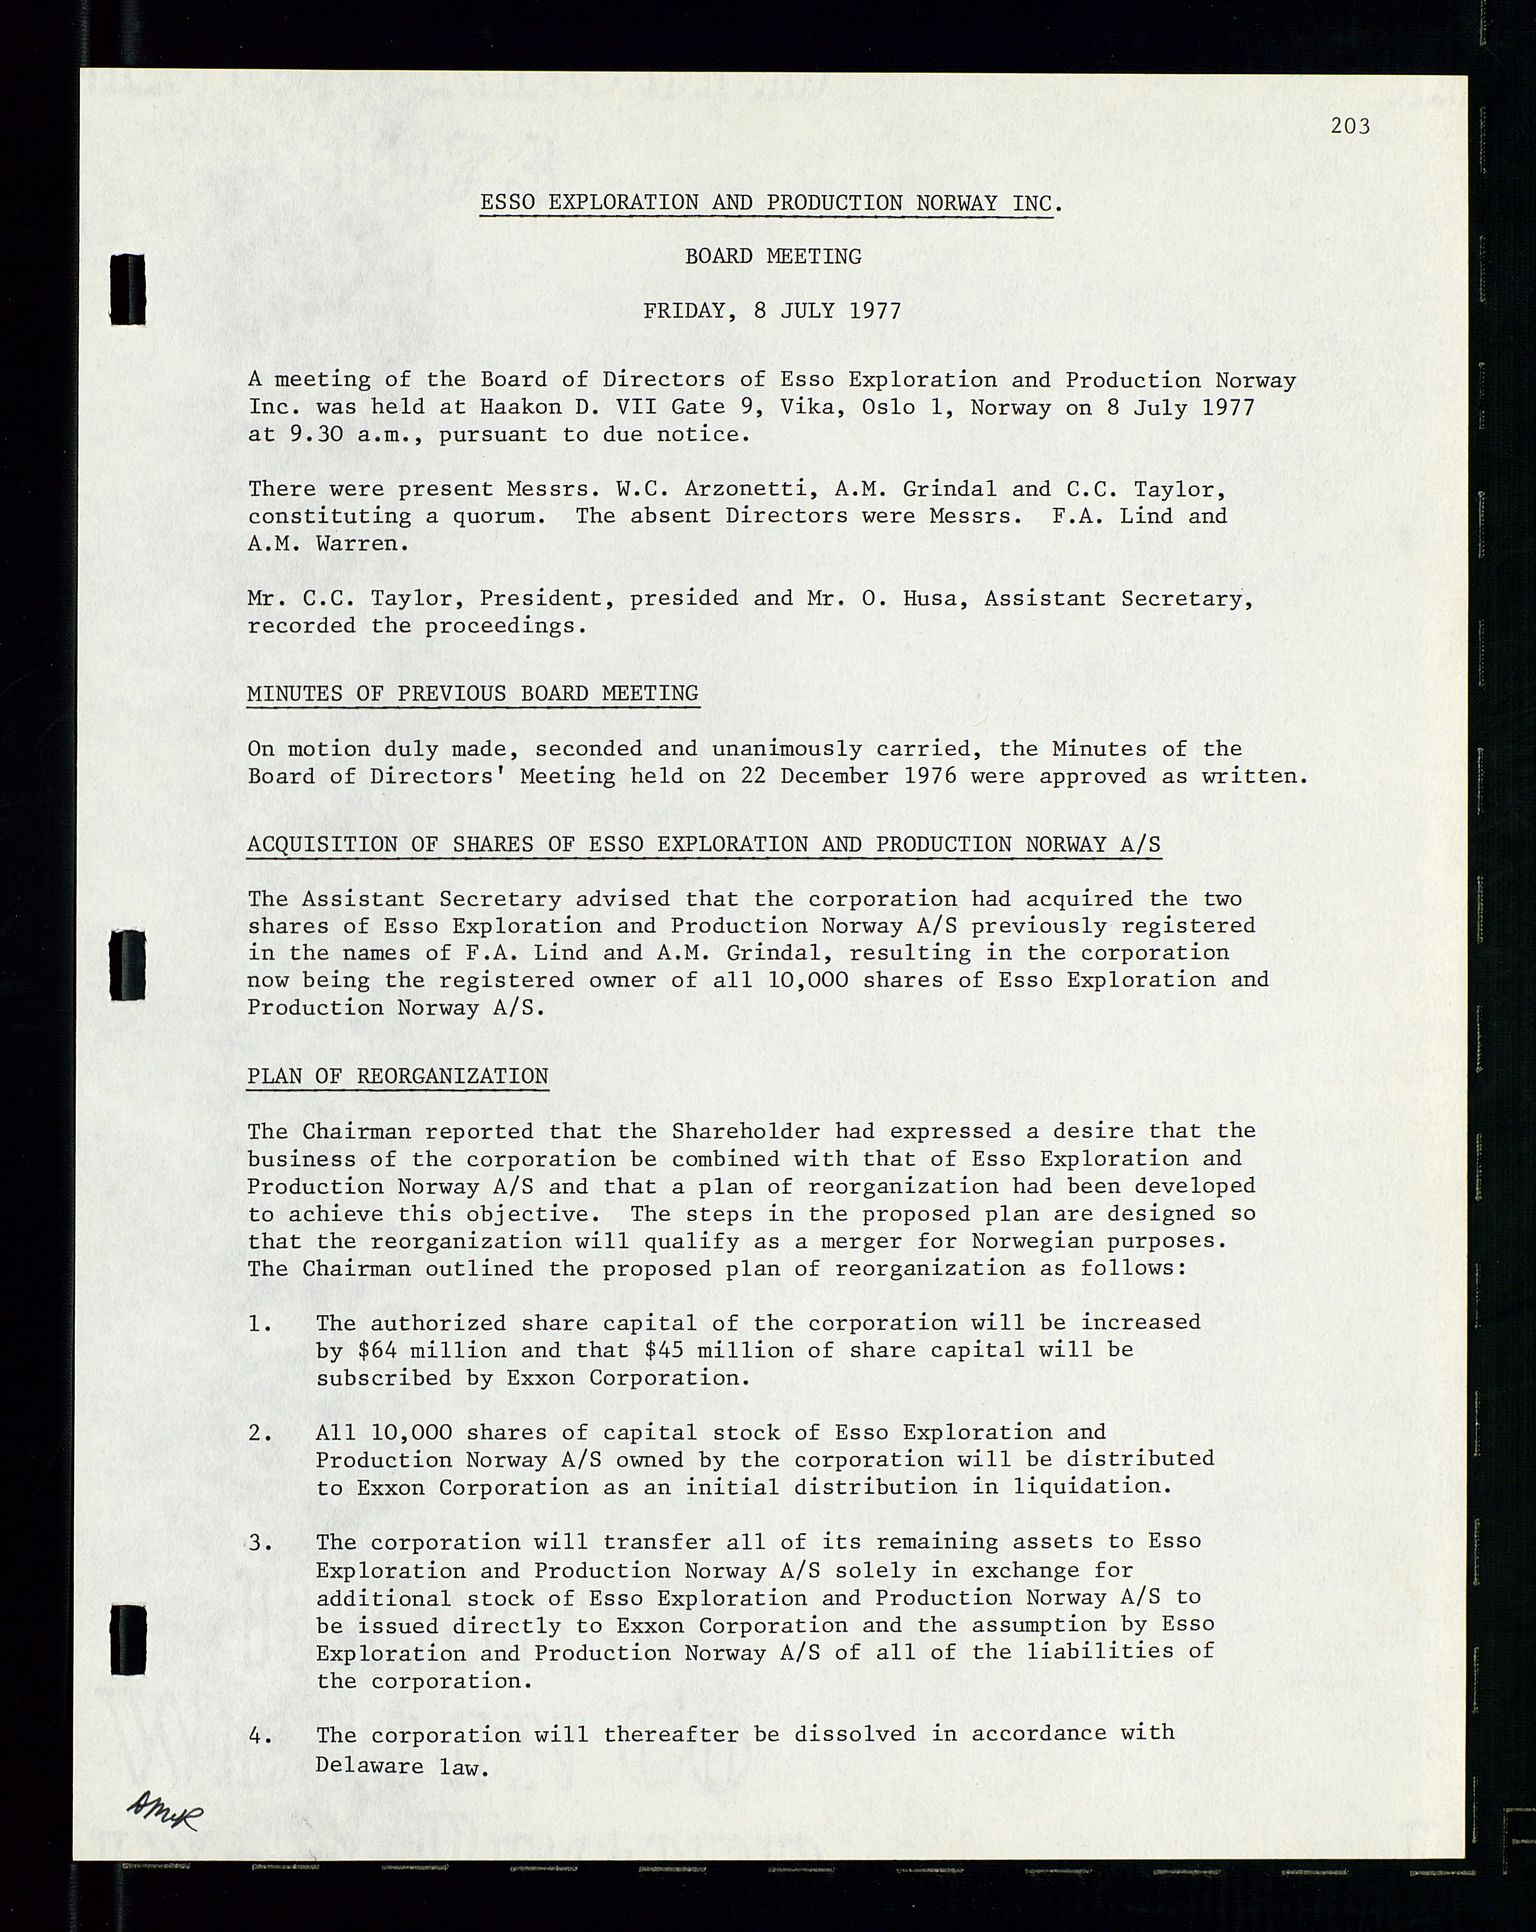 Pa 1512 - Esso Exploration and Production Norway Inc., SAST/A-101917/A/Aa/L0001/0002: Styredokumenter / Corporate records, Board meeting minutes, Agreements, Stocholder meetings, 1975-1979, p. 54